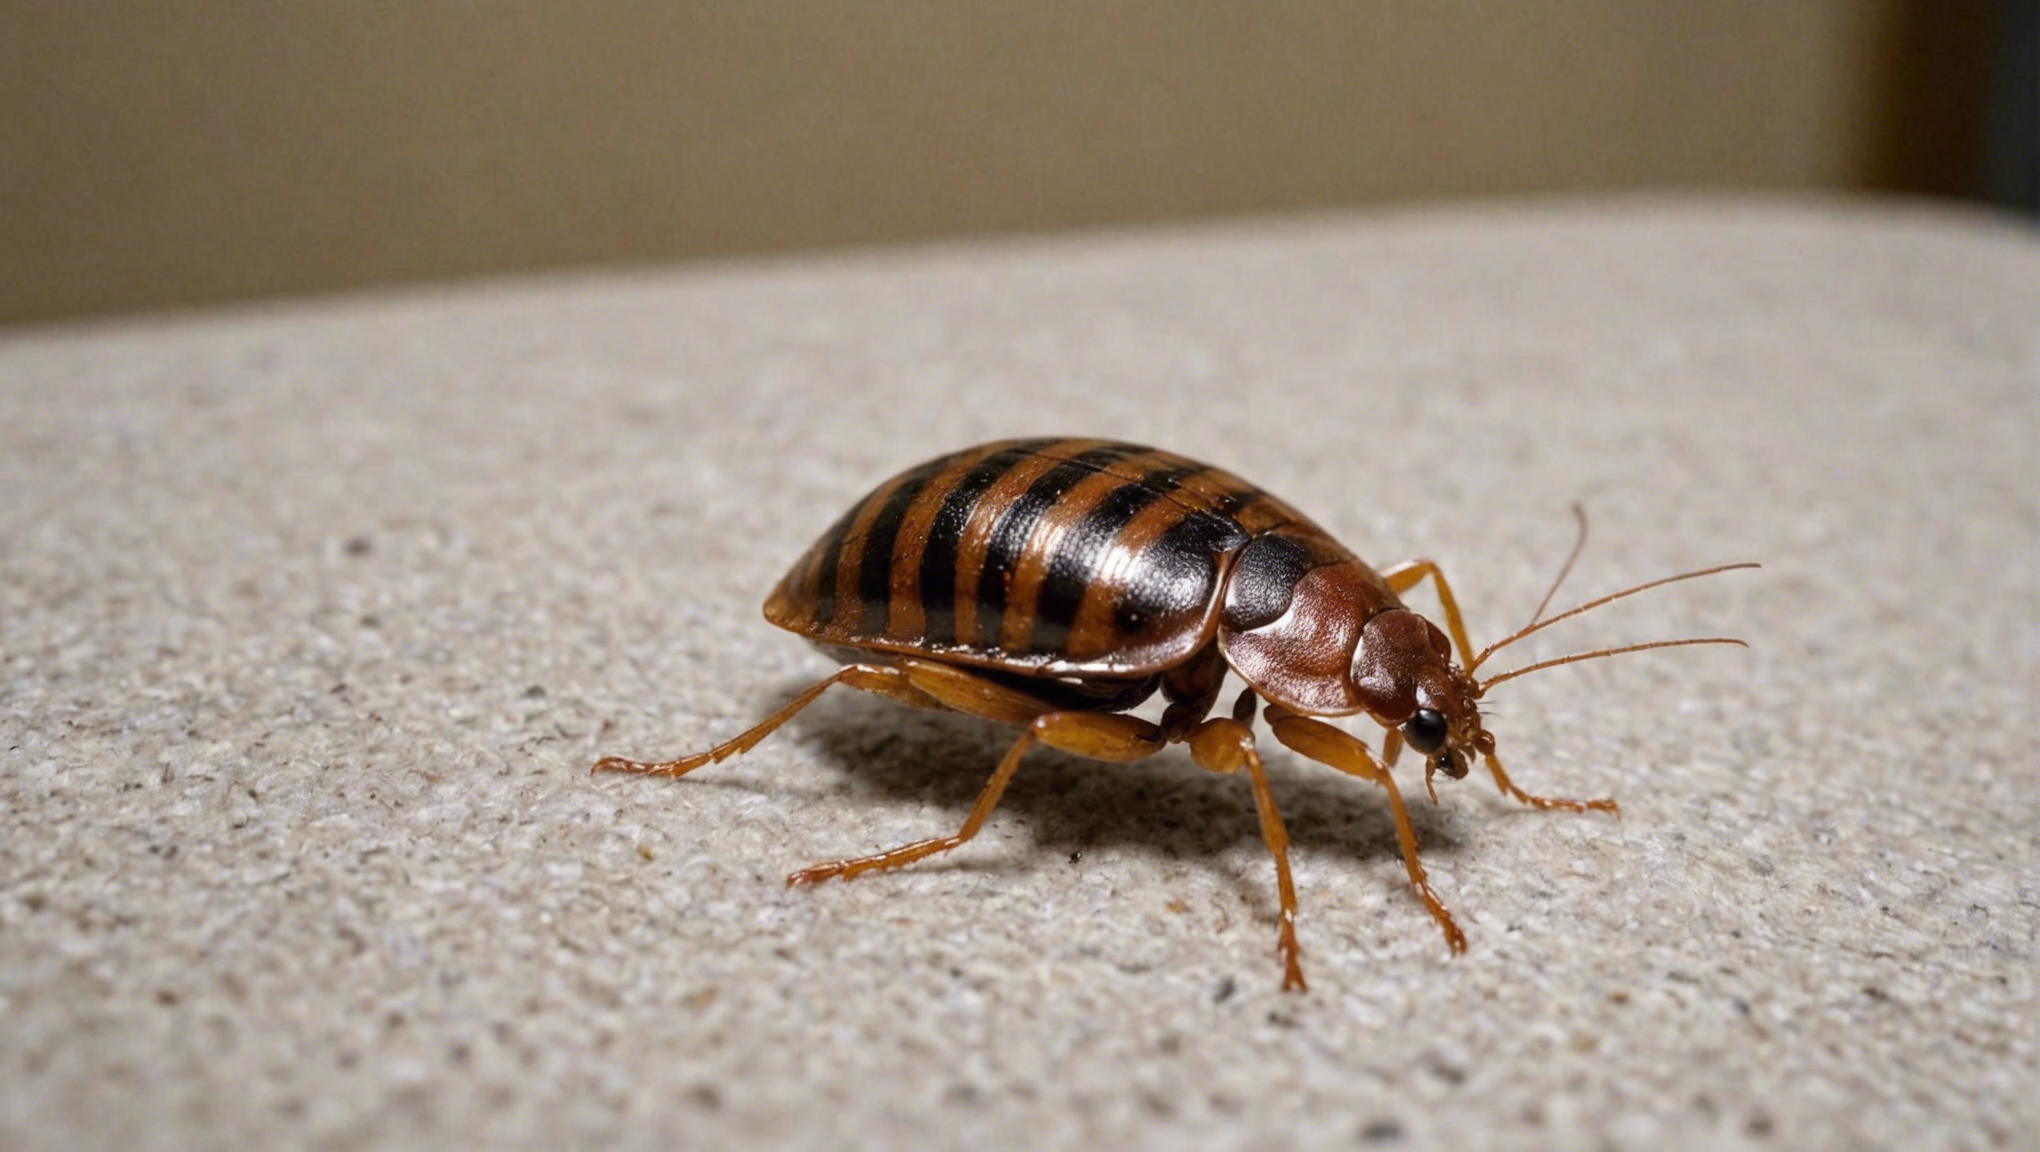 learn effective strategies to avoid bringing bed bugs home when you travel. explore useful tips to safeguard against bed bug infestations during your trips.